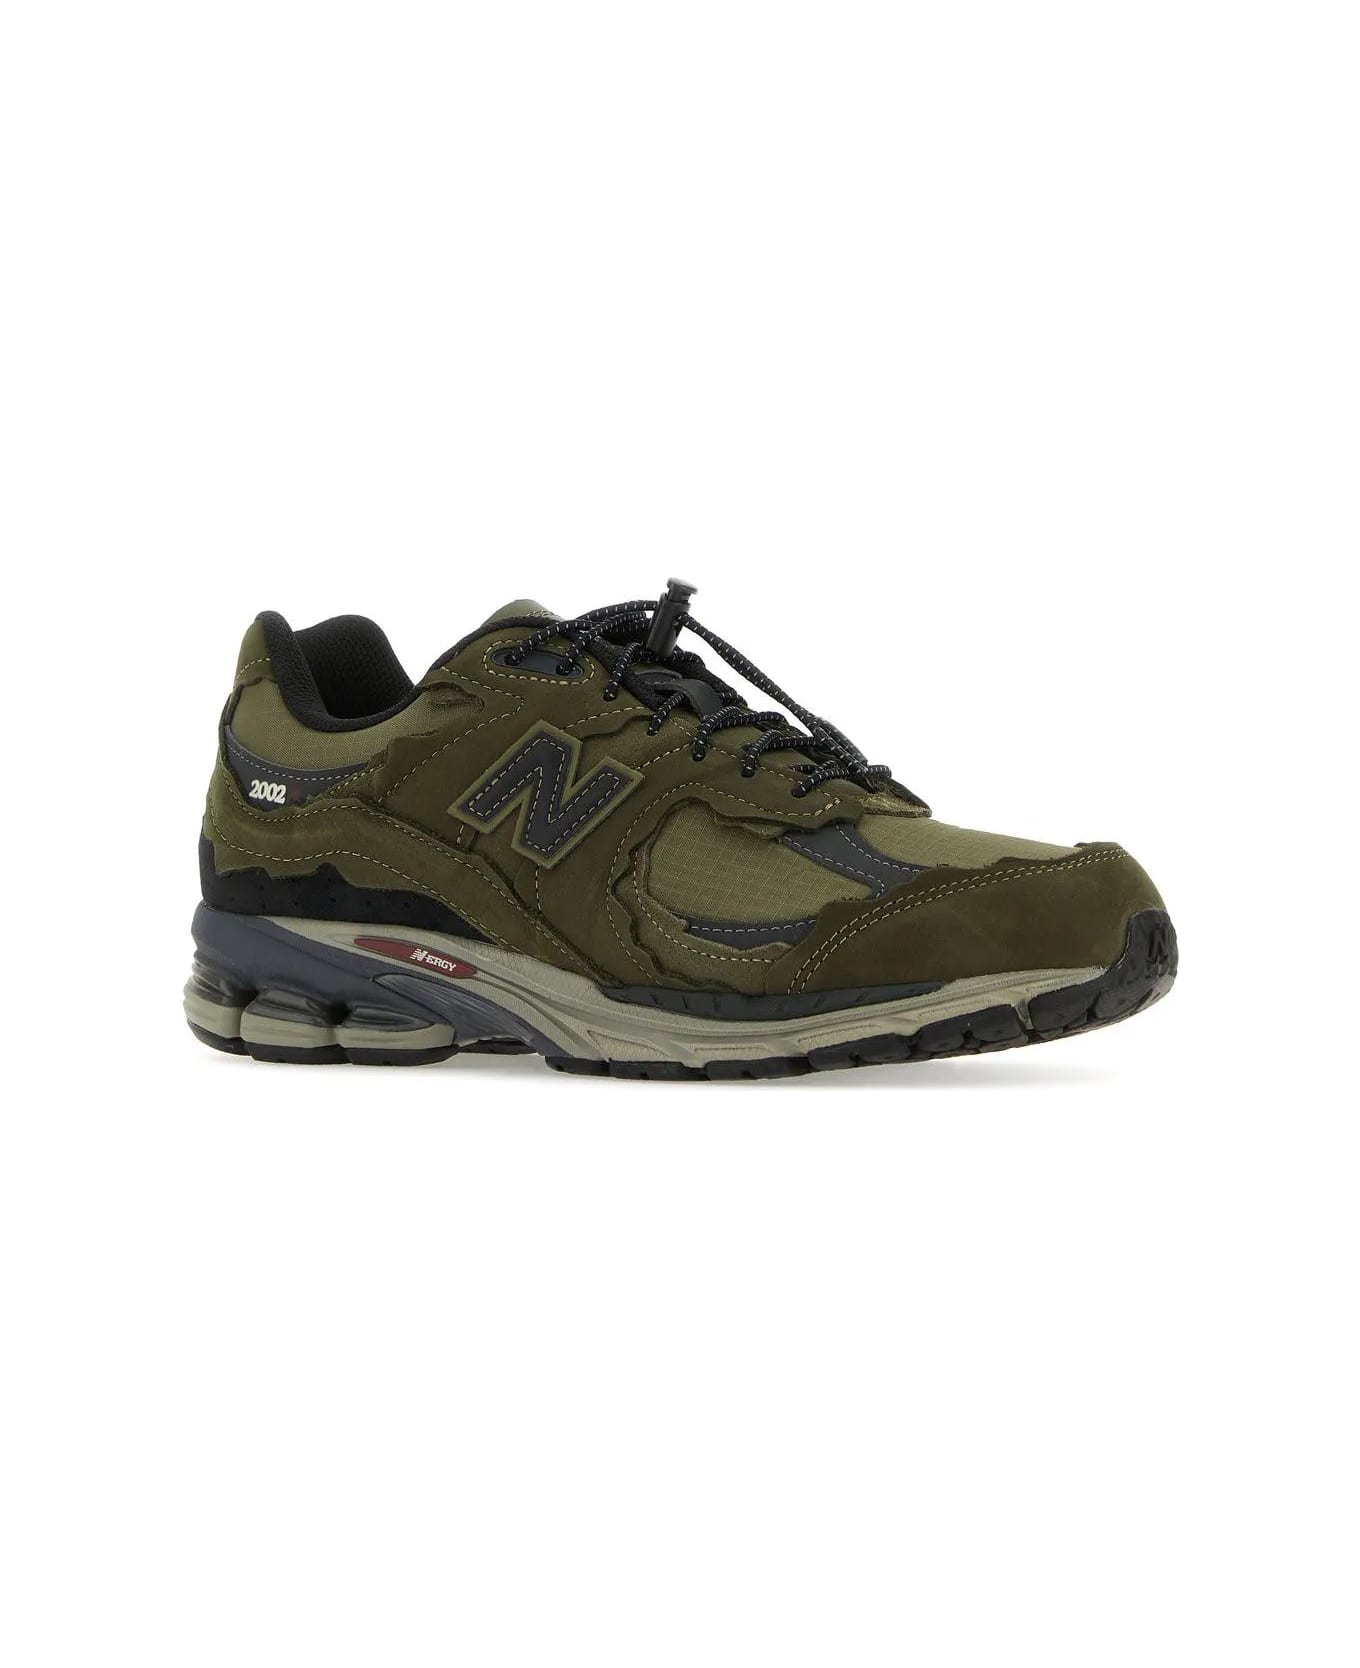 New Balance Multicolor Suede And Fabric 2002r Sneakers - Camouflage